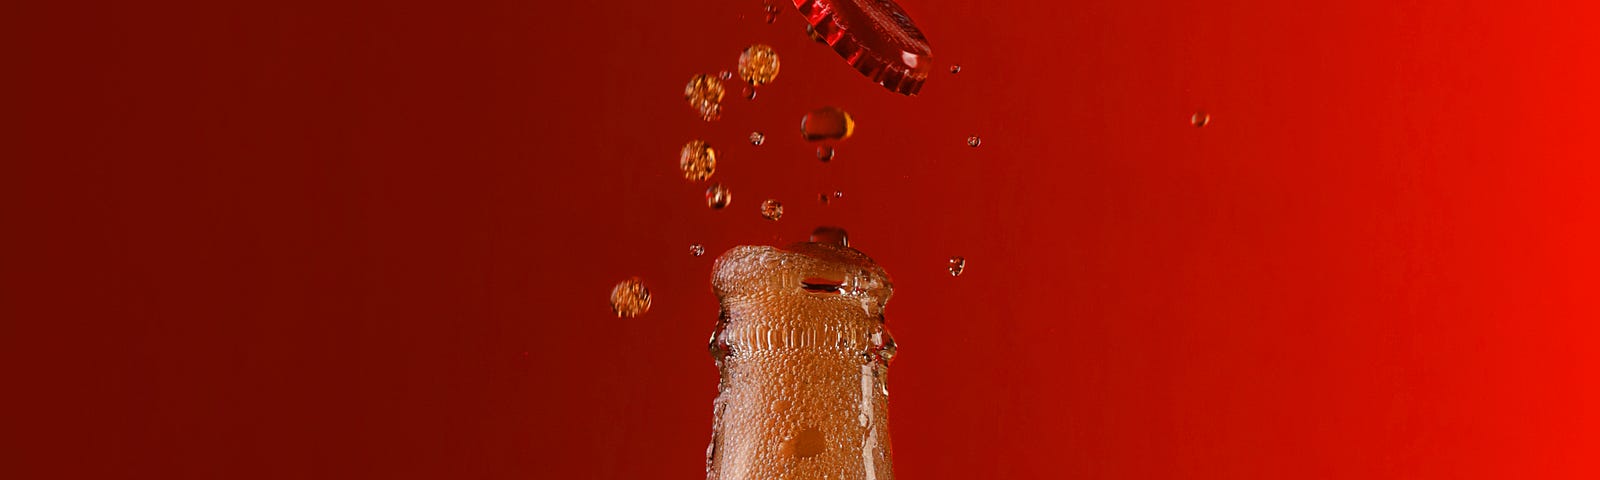 A Coke bottle fizzes and pops it’s lid in front of a plain red background.